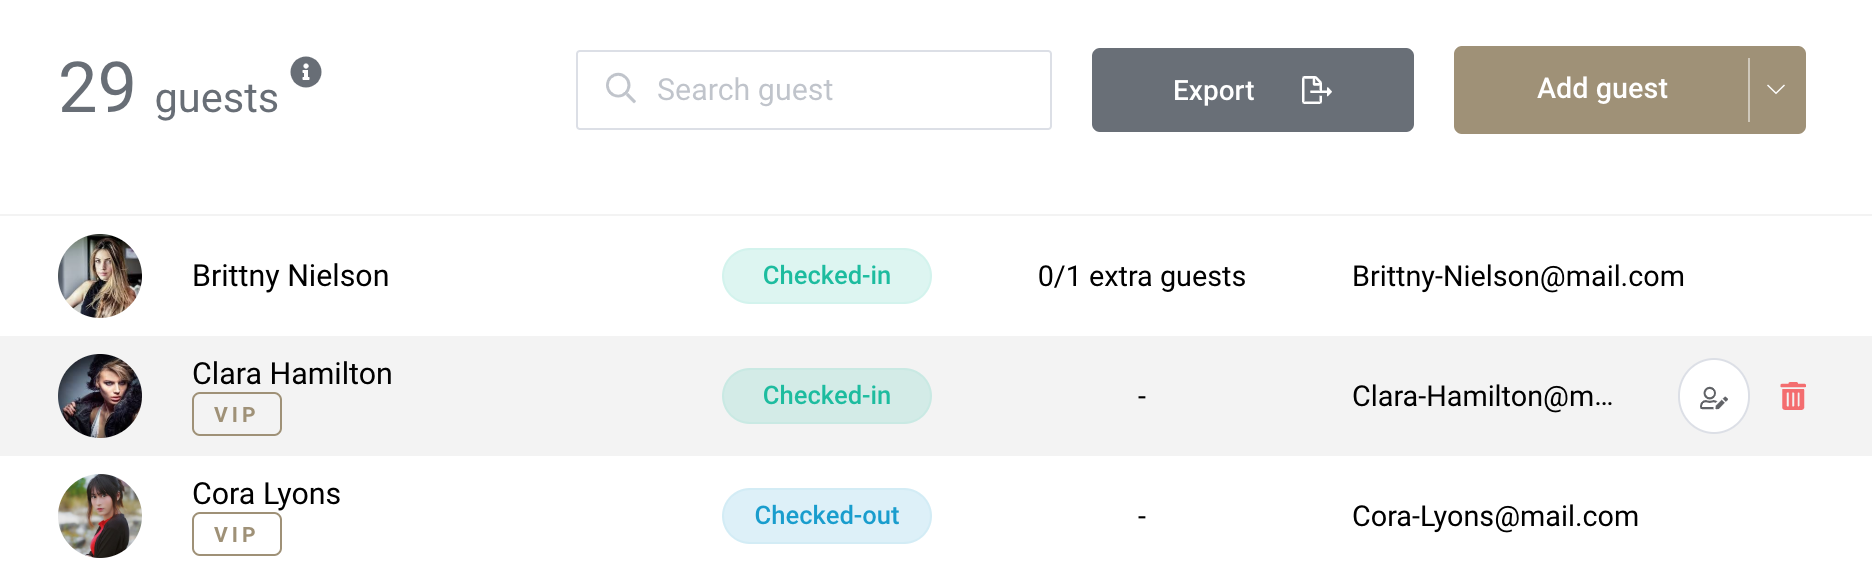 Delete guests one by one from Eventor.app